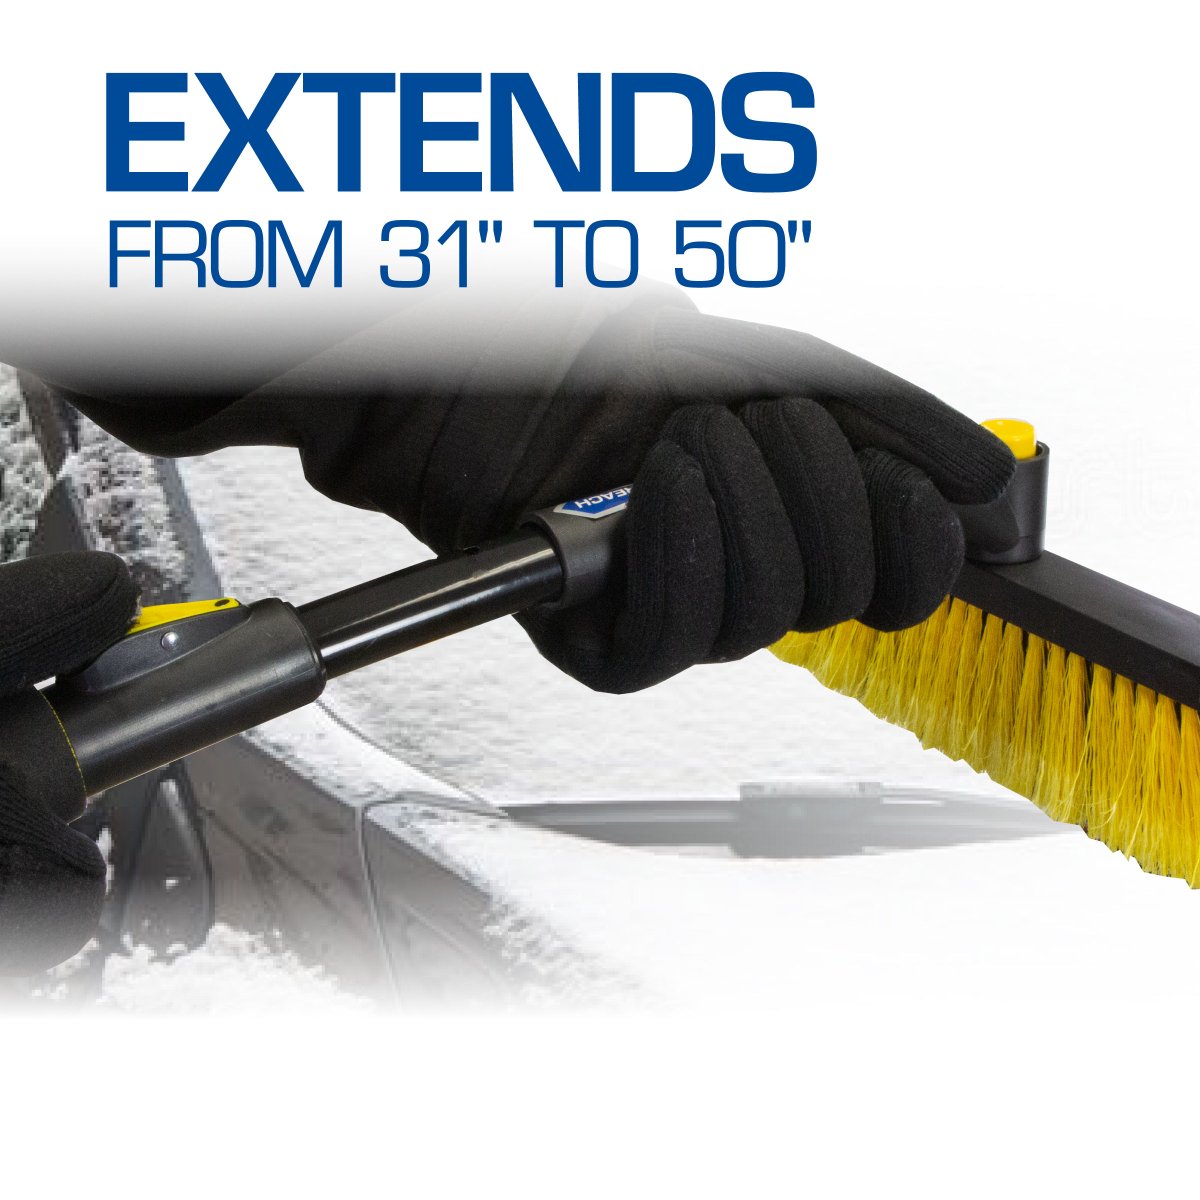 With its 360° pivoting head and wide reach, our 50” Crossover Snowbroom is just the tool you need to get on the road safely this holiday season! Find it at Walmart & Walmart.com! bit.ly/3Y91lXt #RainX #snowbroom #snowbrush #winterready #OutsmartTheElements